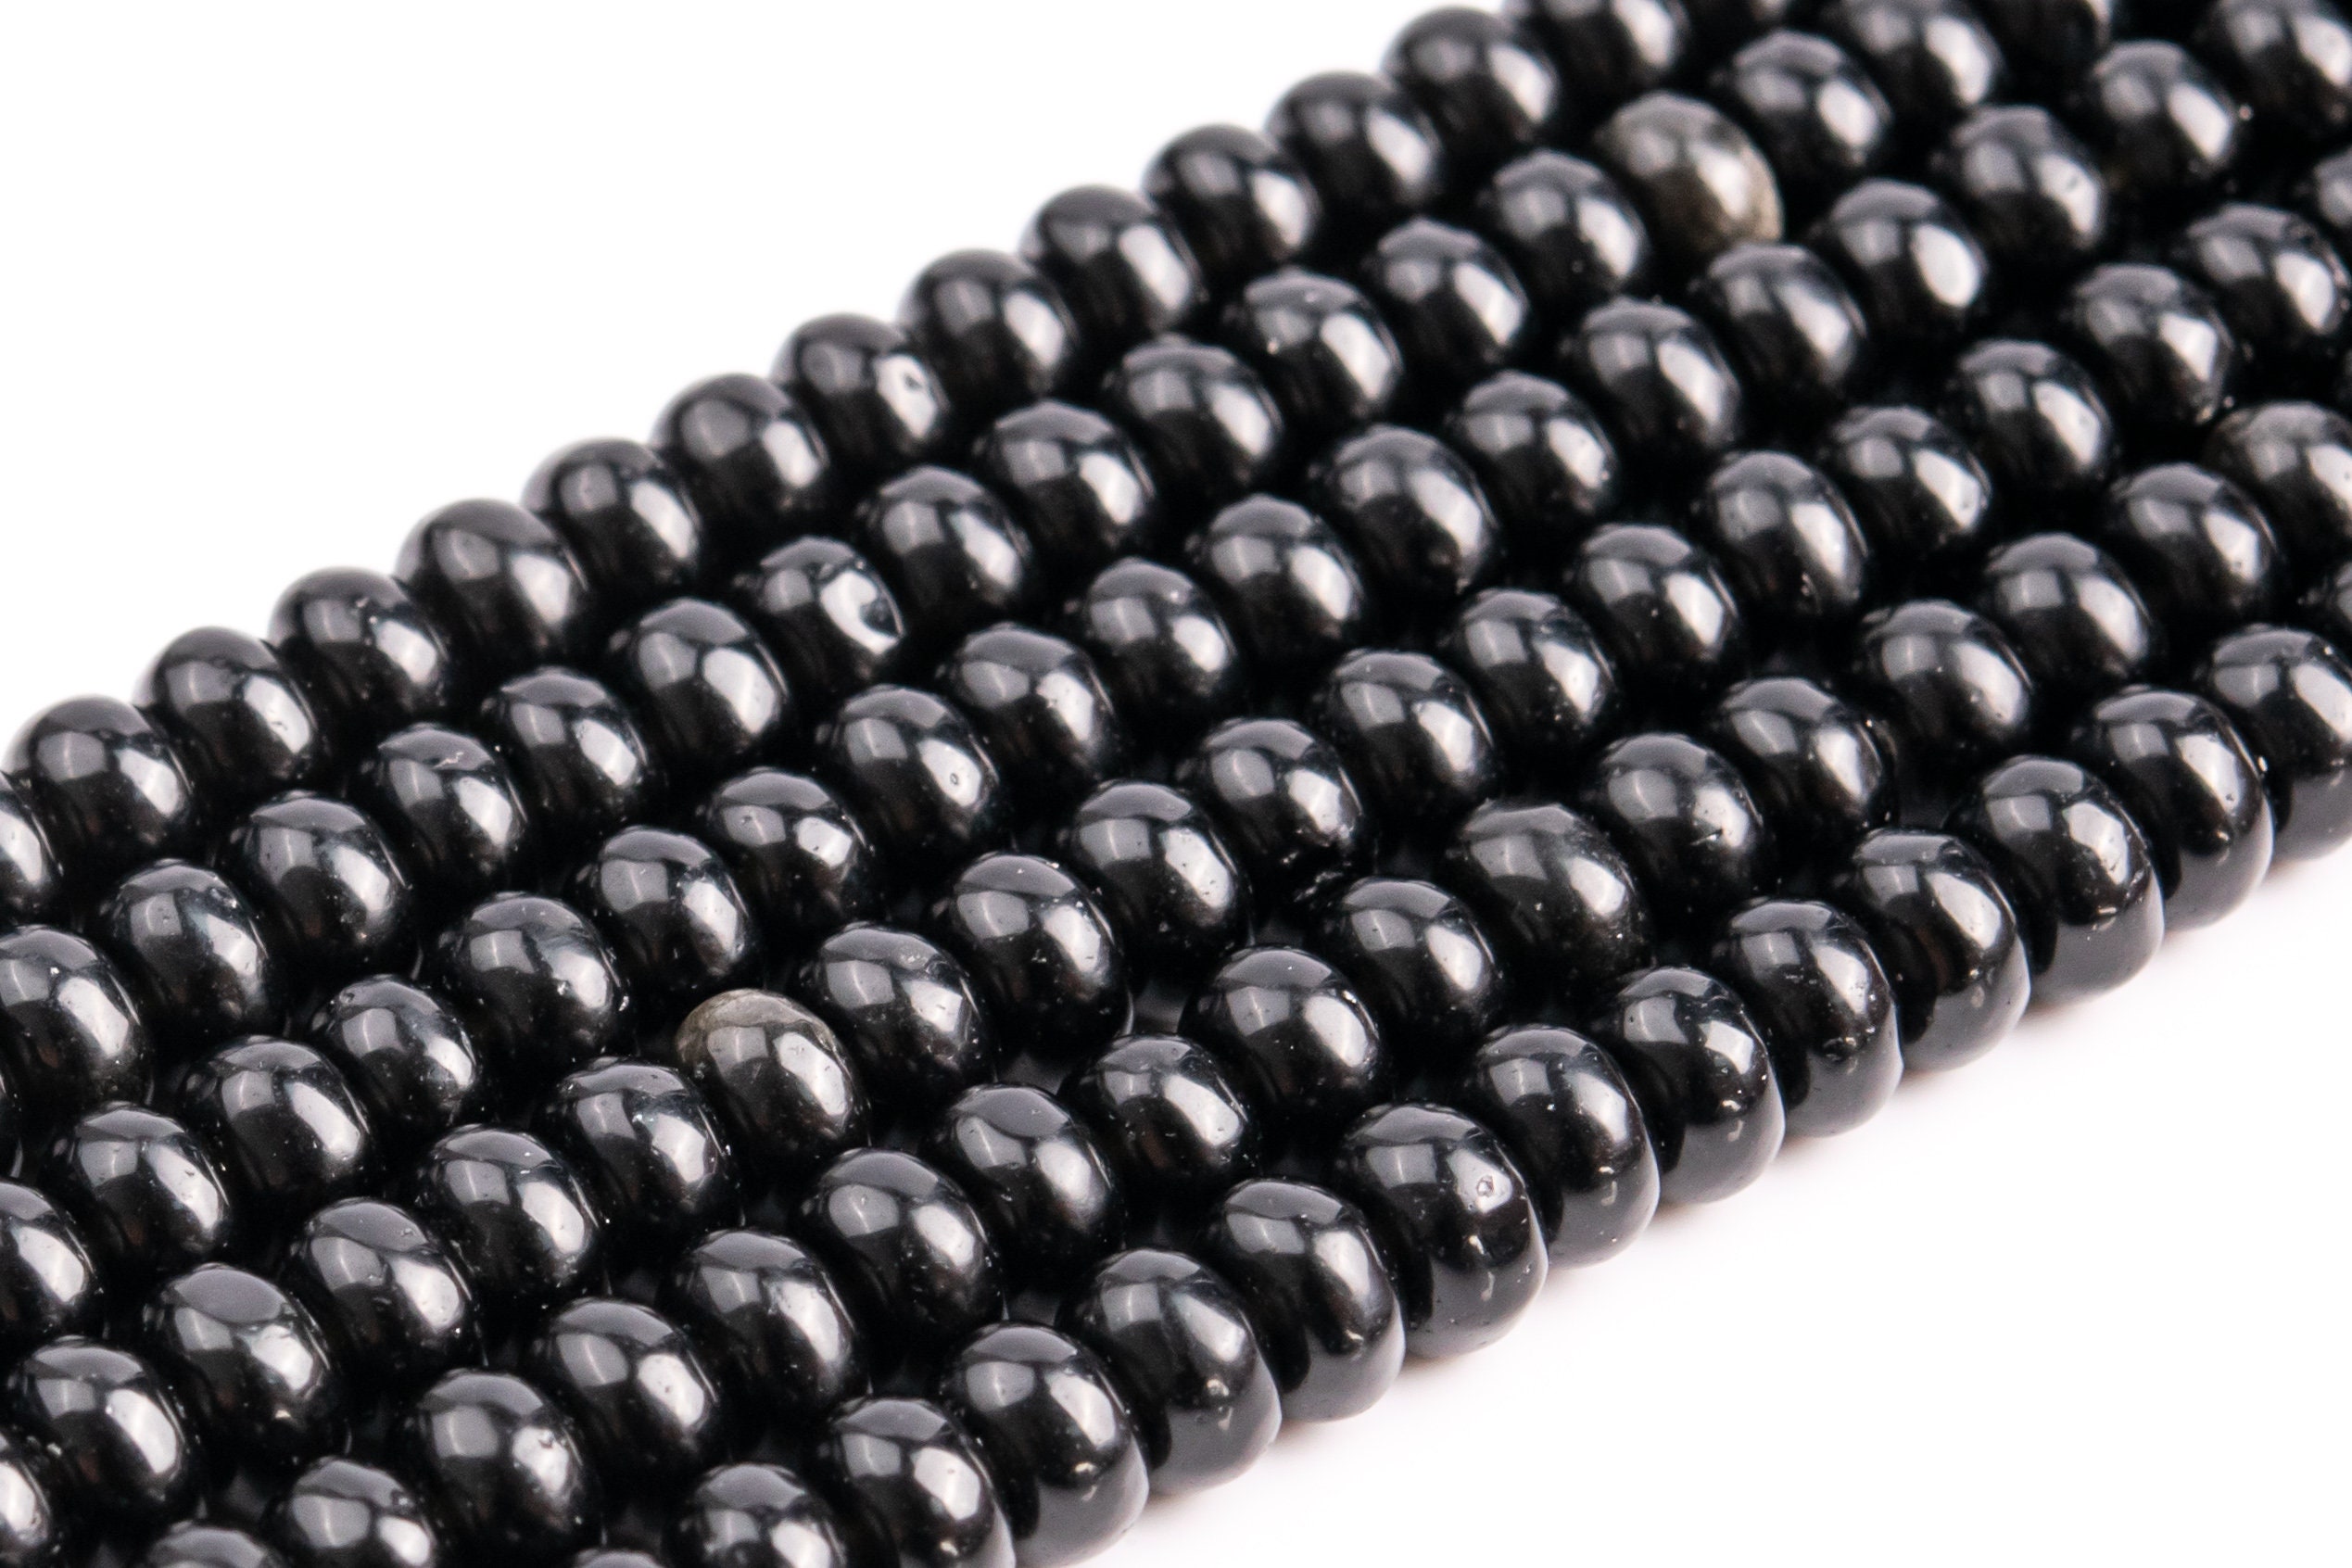 Bacatgem 15 Pcs Natural Black Obsidian Large HoleLoose Stone Rondelle Beads Crystals and Healing Stones,6mm DIY-Jewelry Makings